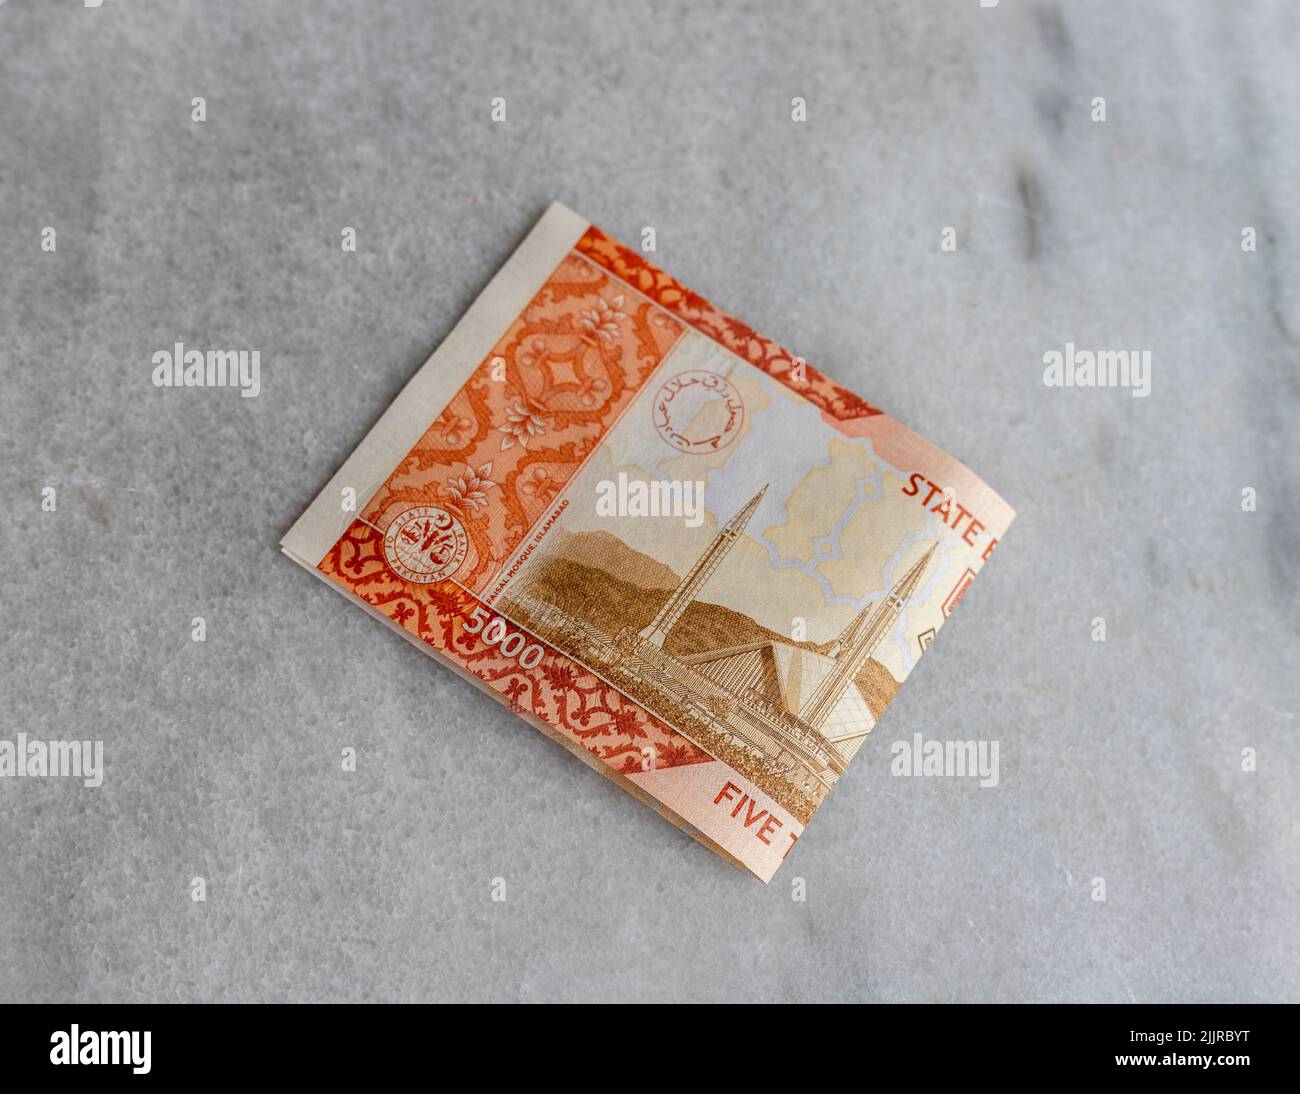 Pakistani currency bank notes of 5000 rupees isolated on marble background. Stock Photo